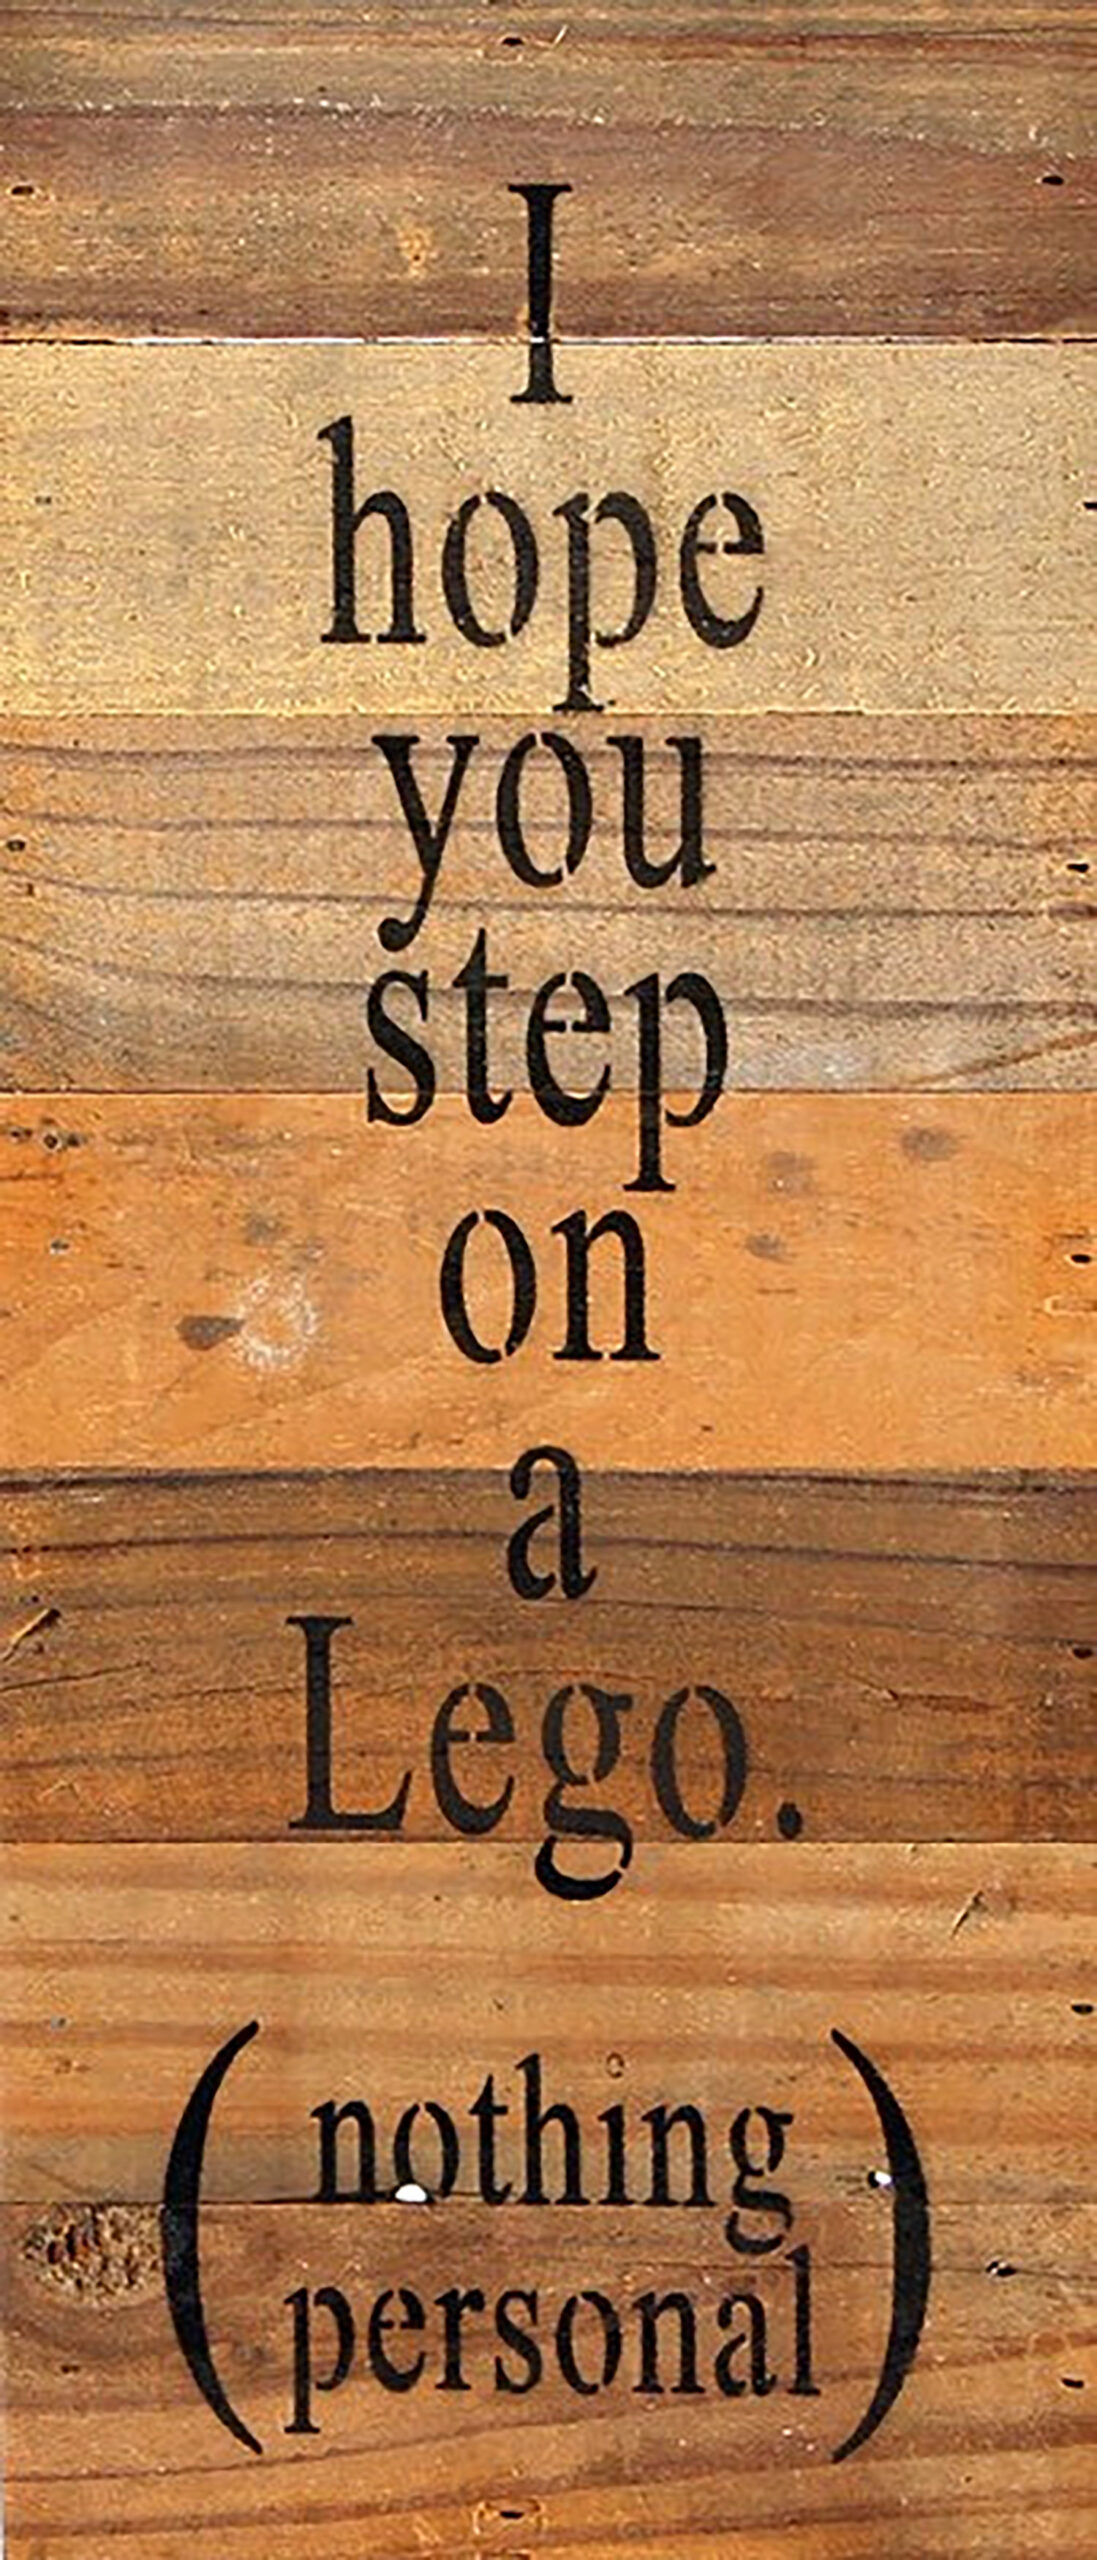 I hope you step on a Lego. (nothing personal) / 6"x14" Reclaimed Wood Sign